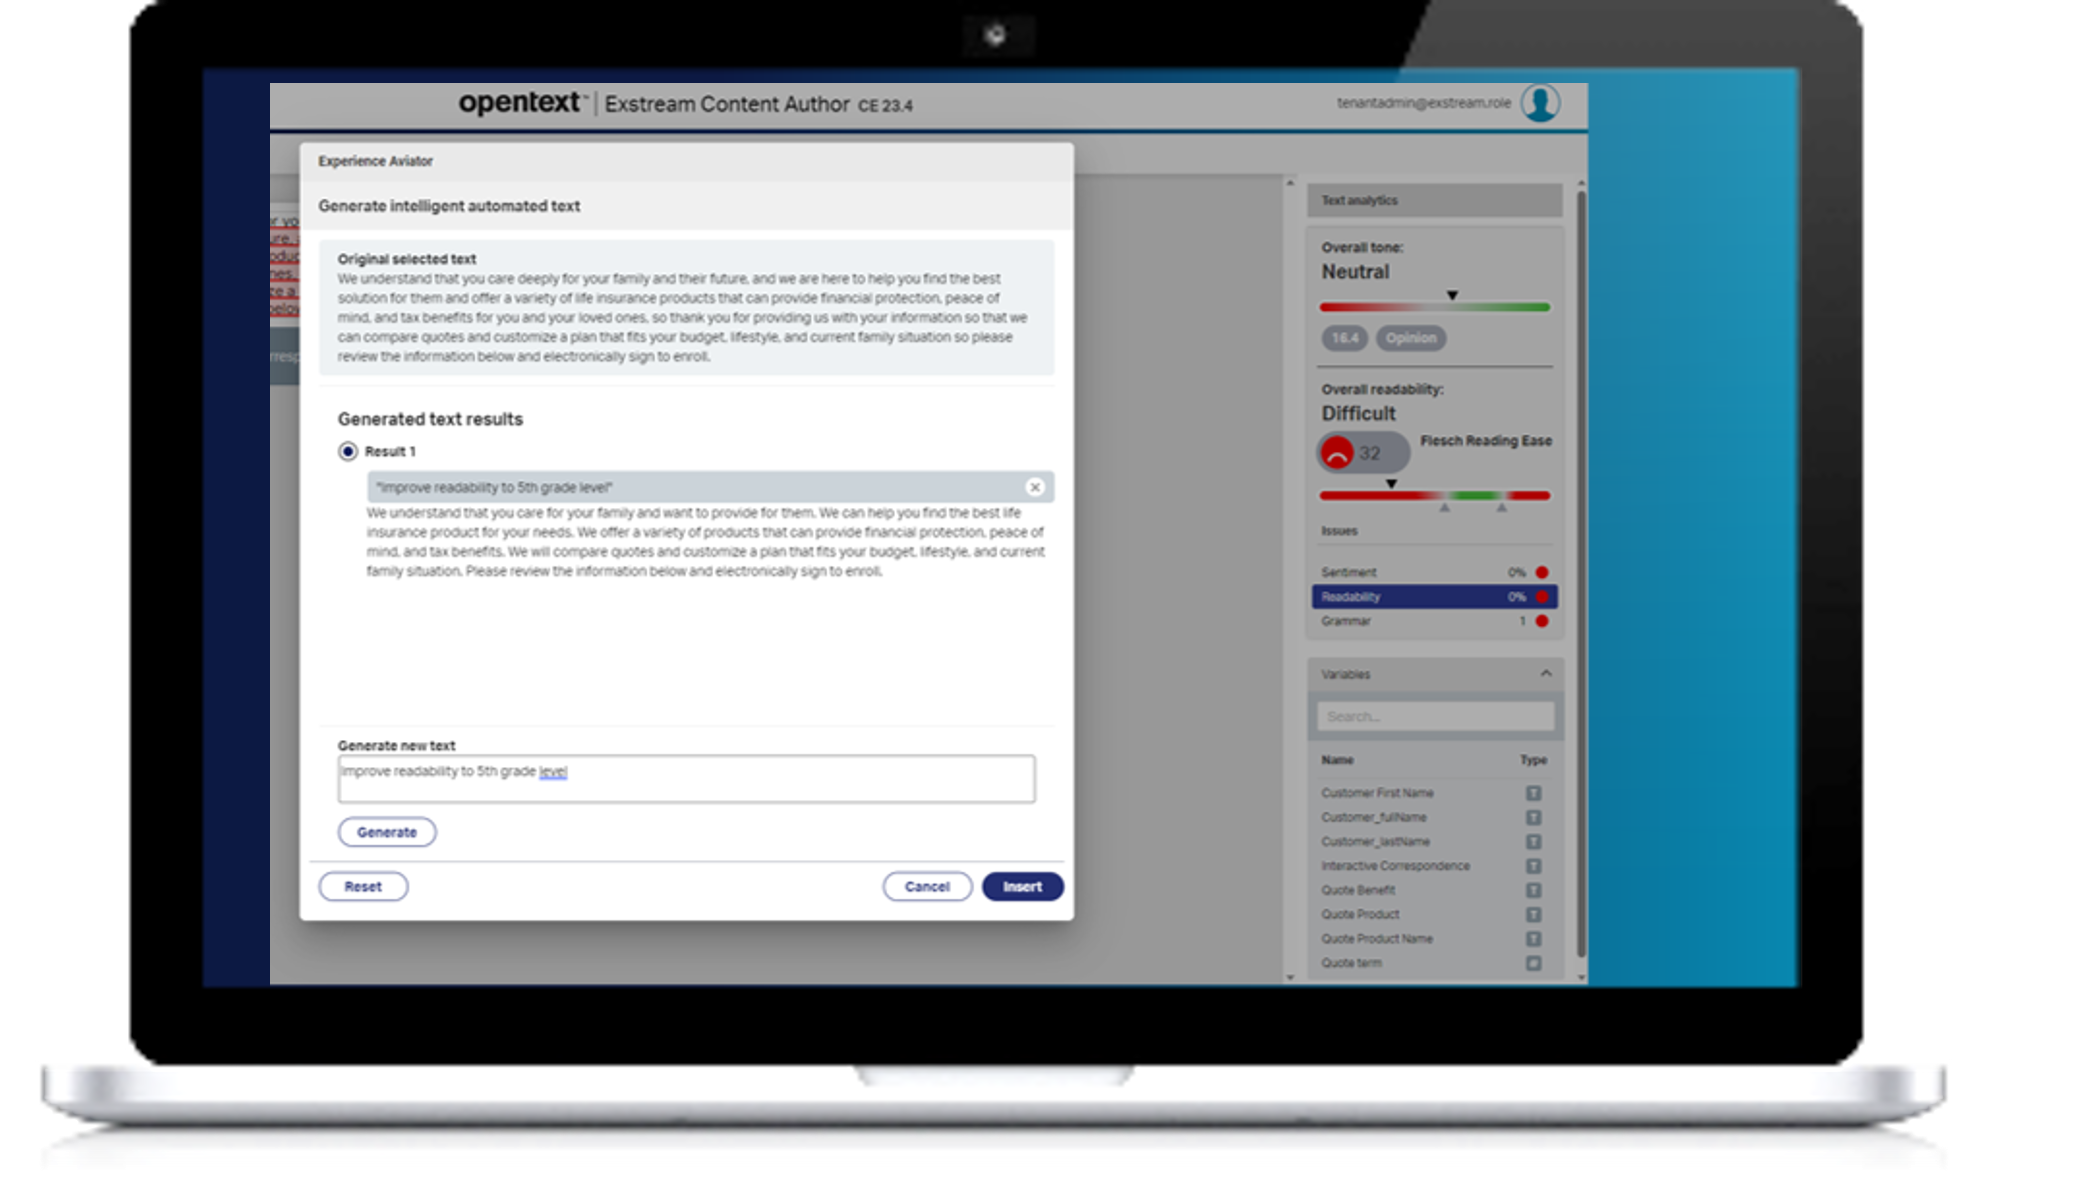 Screenshot displayed on a laptop shows Experience Aviator providing AI-powered content suggestions in the authoring environment of OpenText Exstream 23.4.